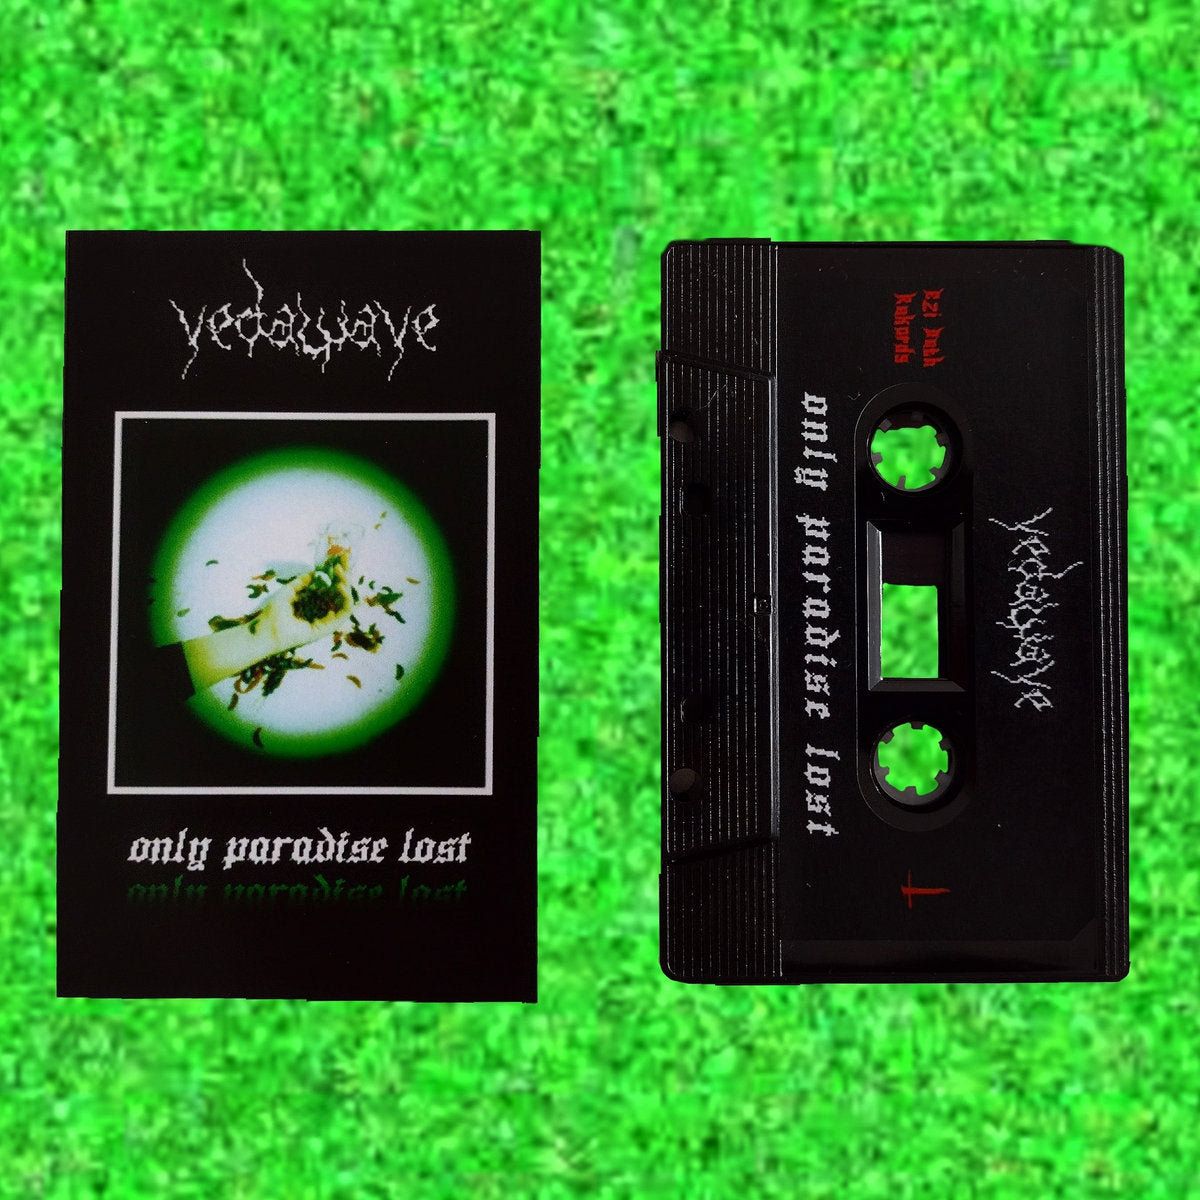 vedawave 'Only Paradise Lost' - Limited Edition Cassette